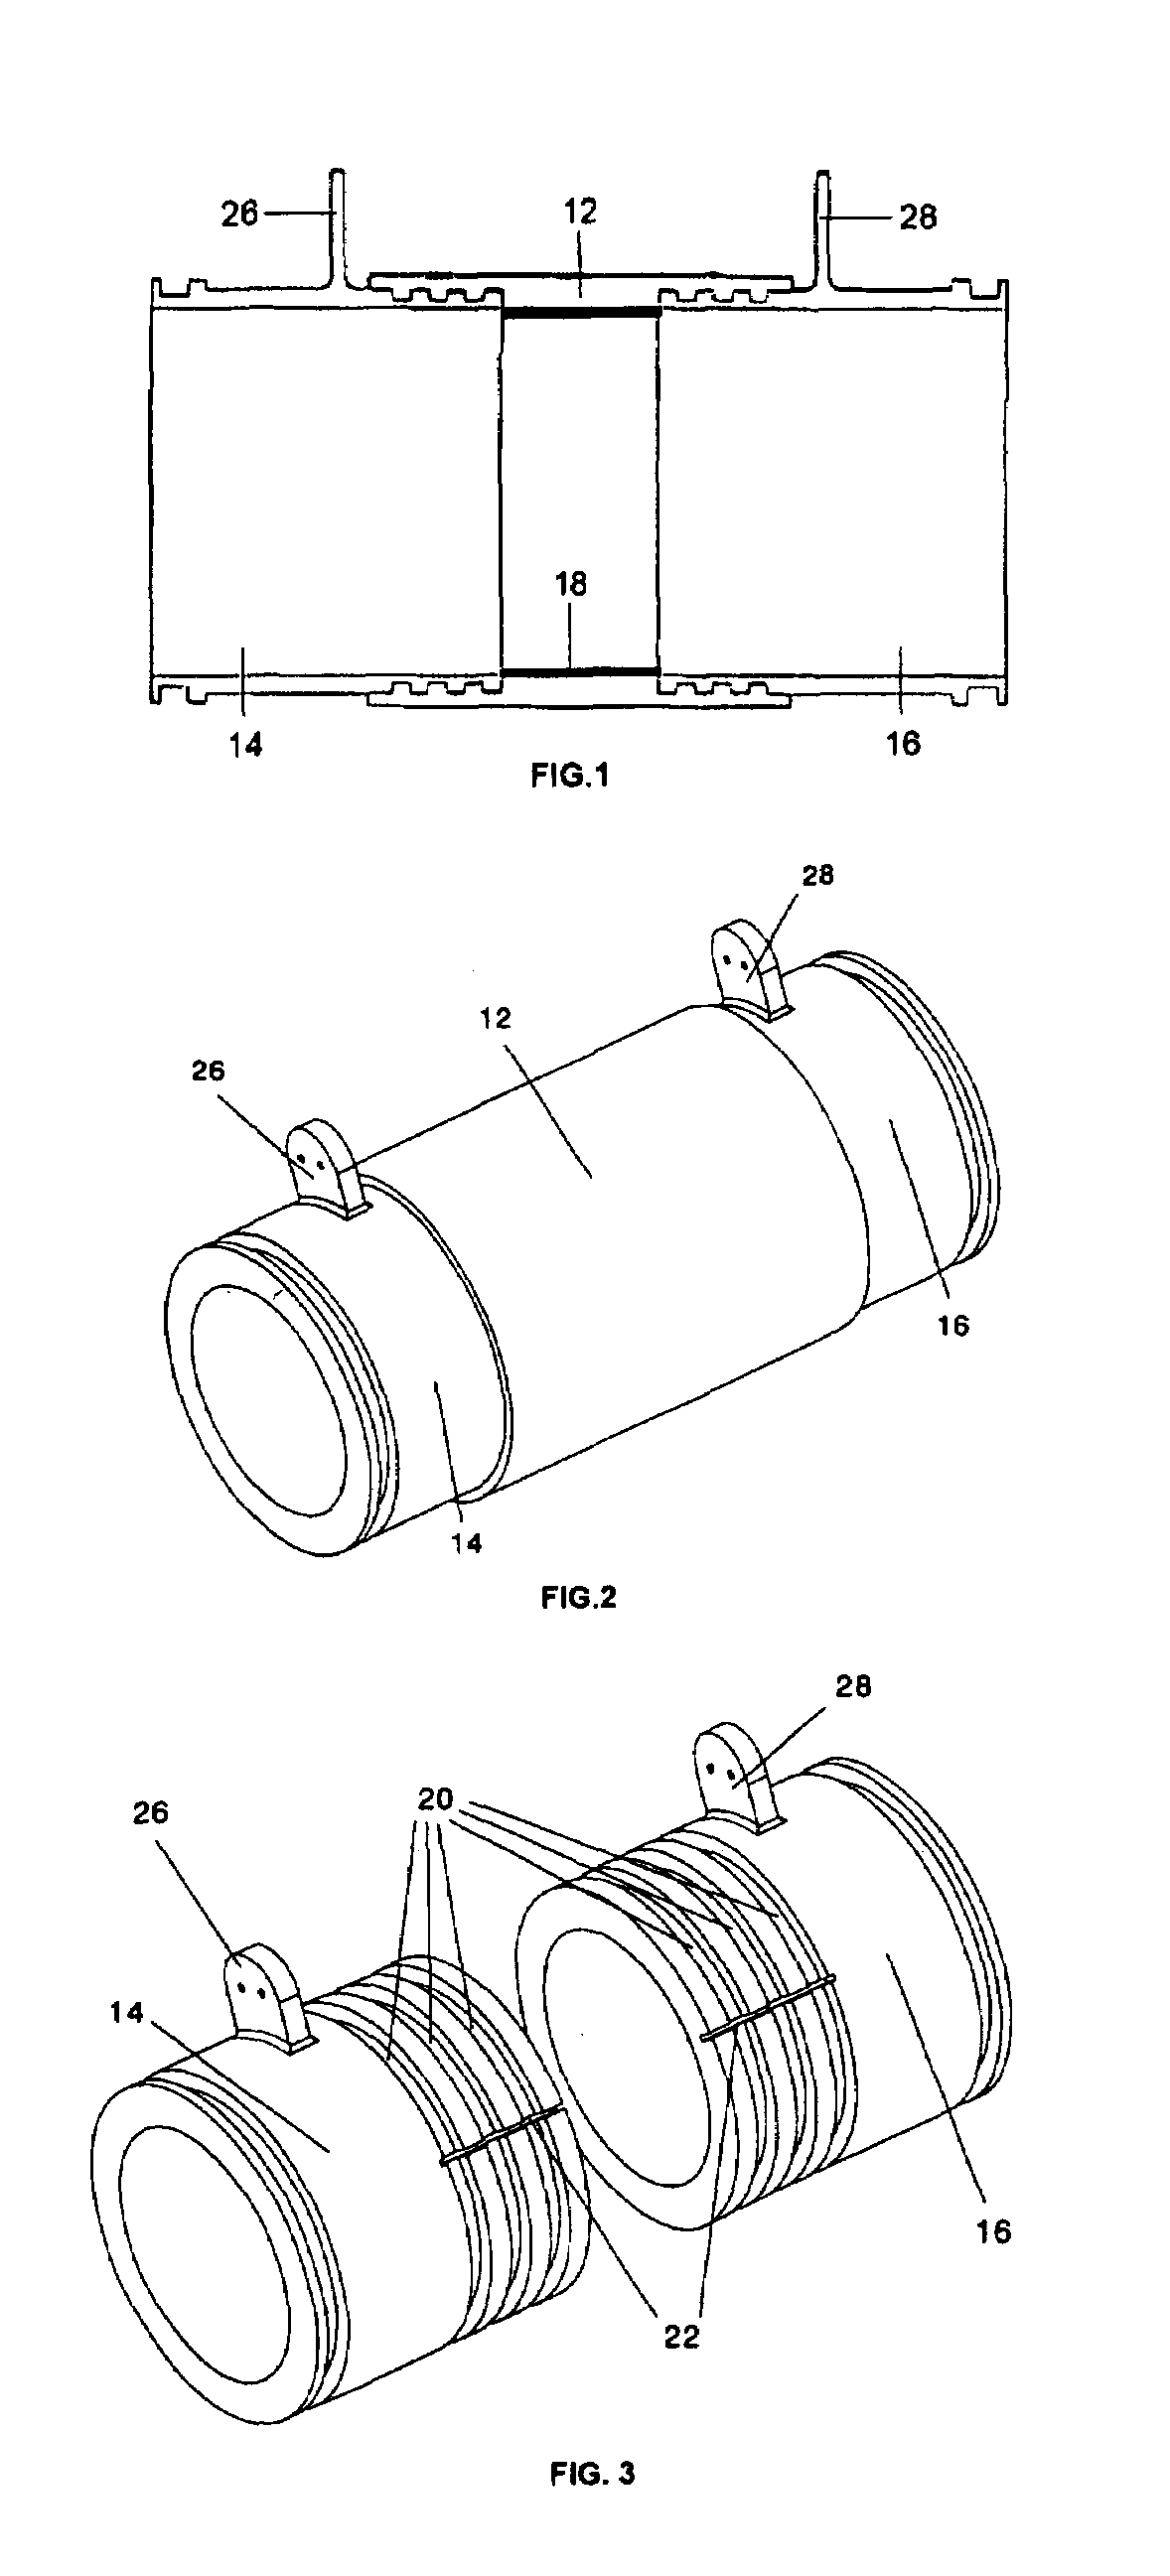 Current insulation system for fluid systems